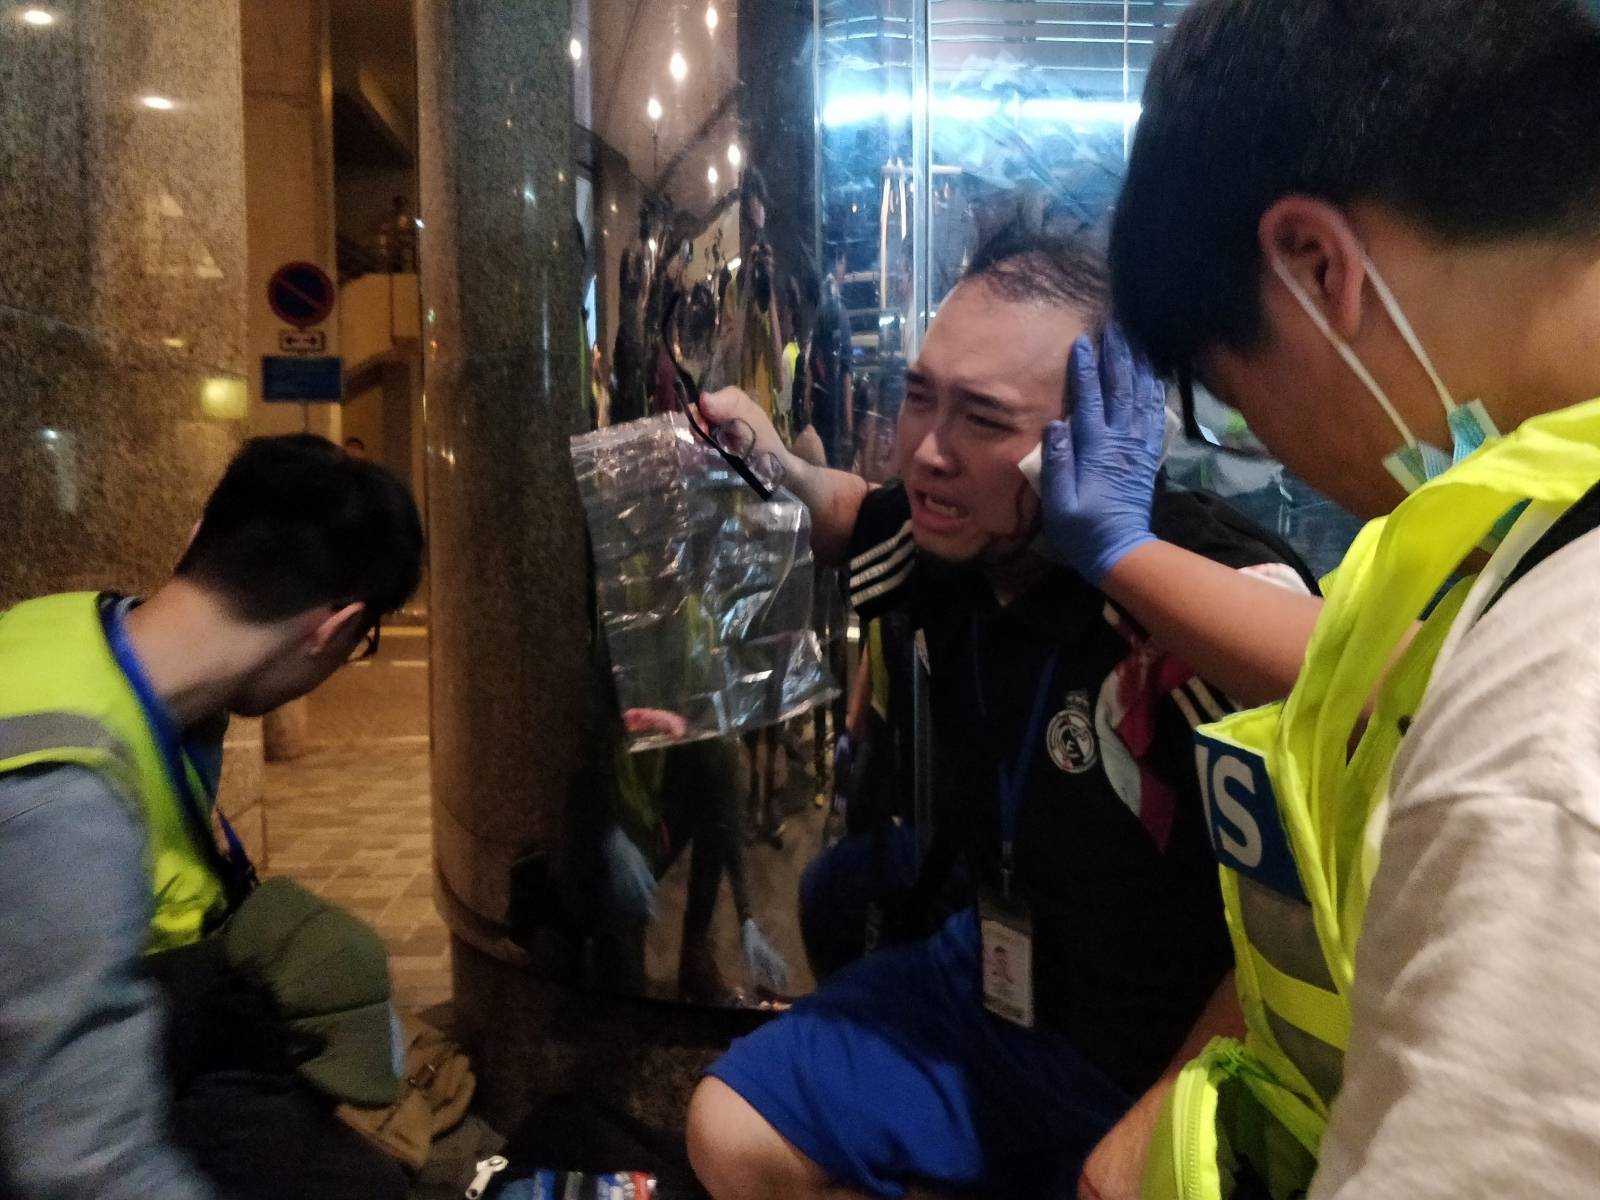 Andrew Chiu Ka Yin, District Councillor of Taikoo Shing West, receives help from first aid volunteers after sustaining an injury in a knife attack at a shopping mall, in Taikoo Shing in Hong Kong